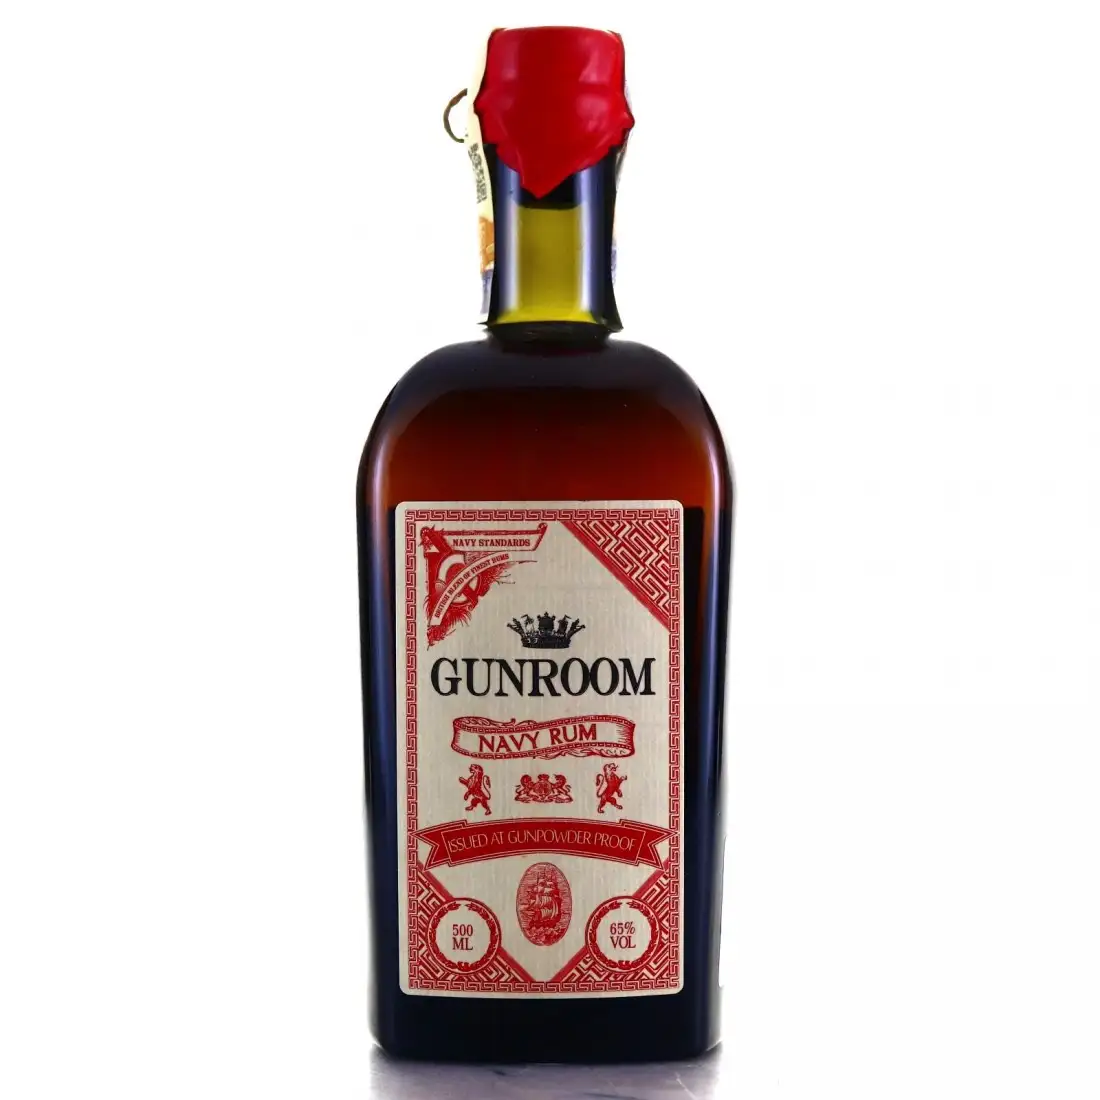 Image of the front of the bottle of the rum Gunroom Navy Rum